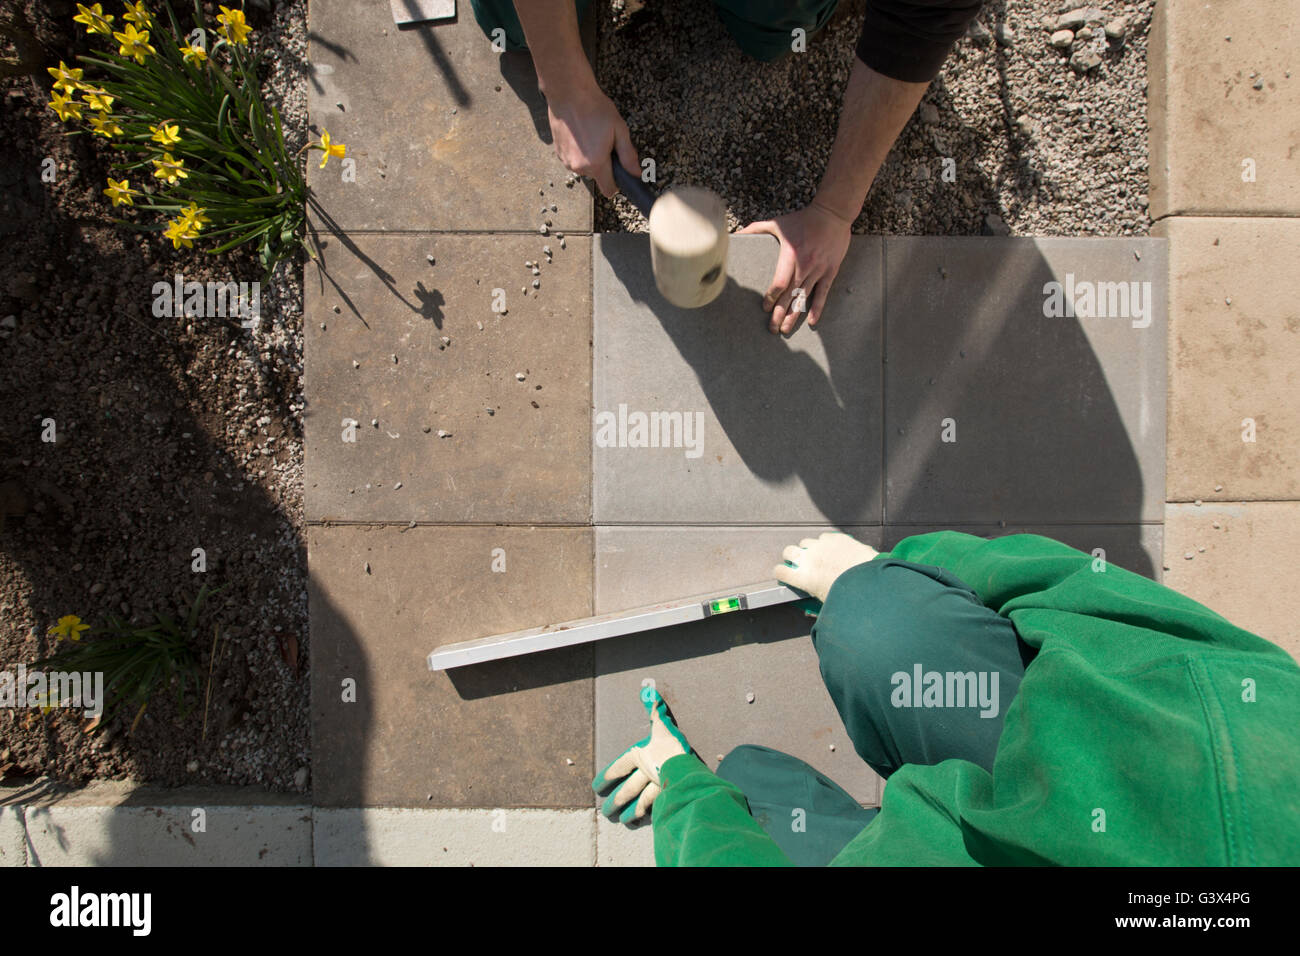 Workers build a path with square paving stones in a garden in spring. Stock Photo